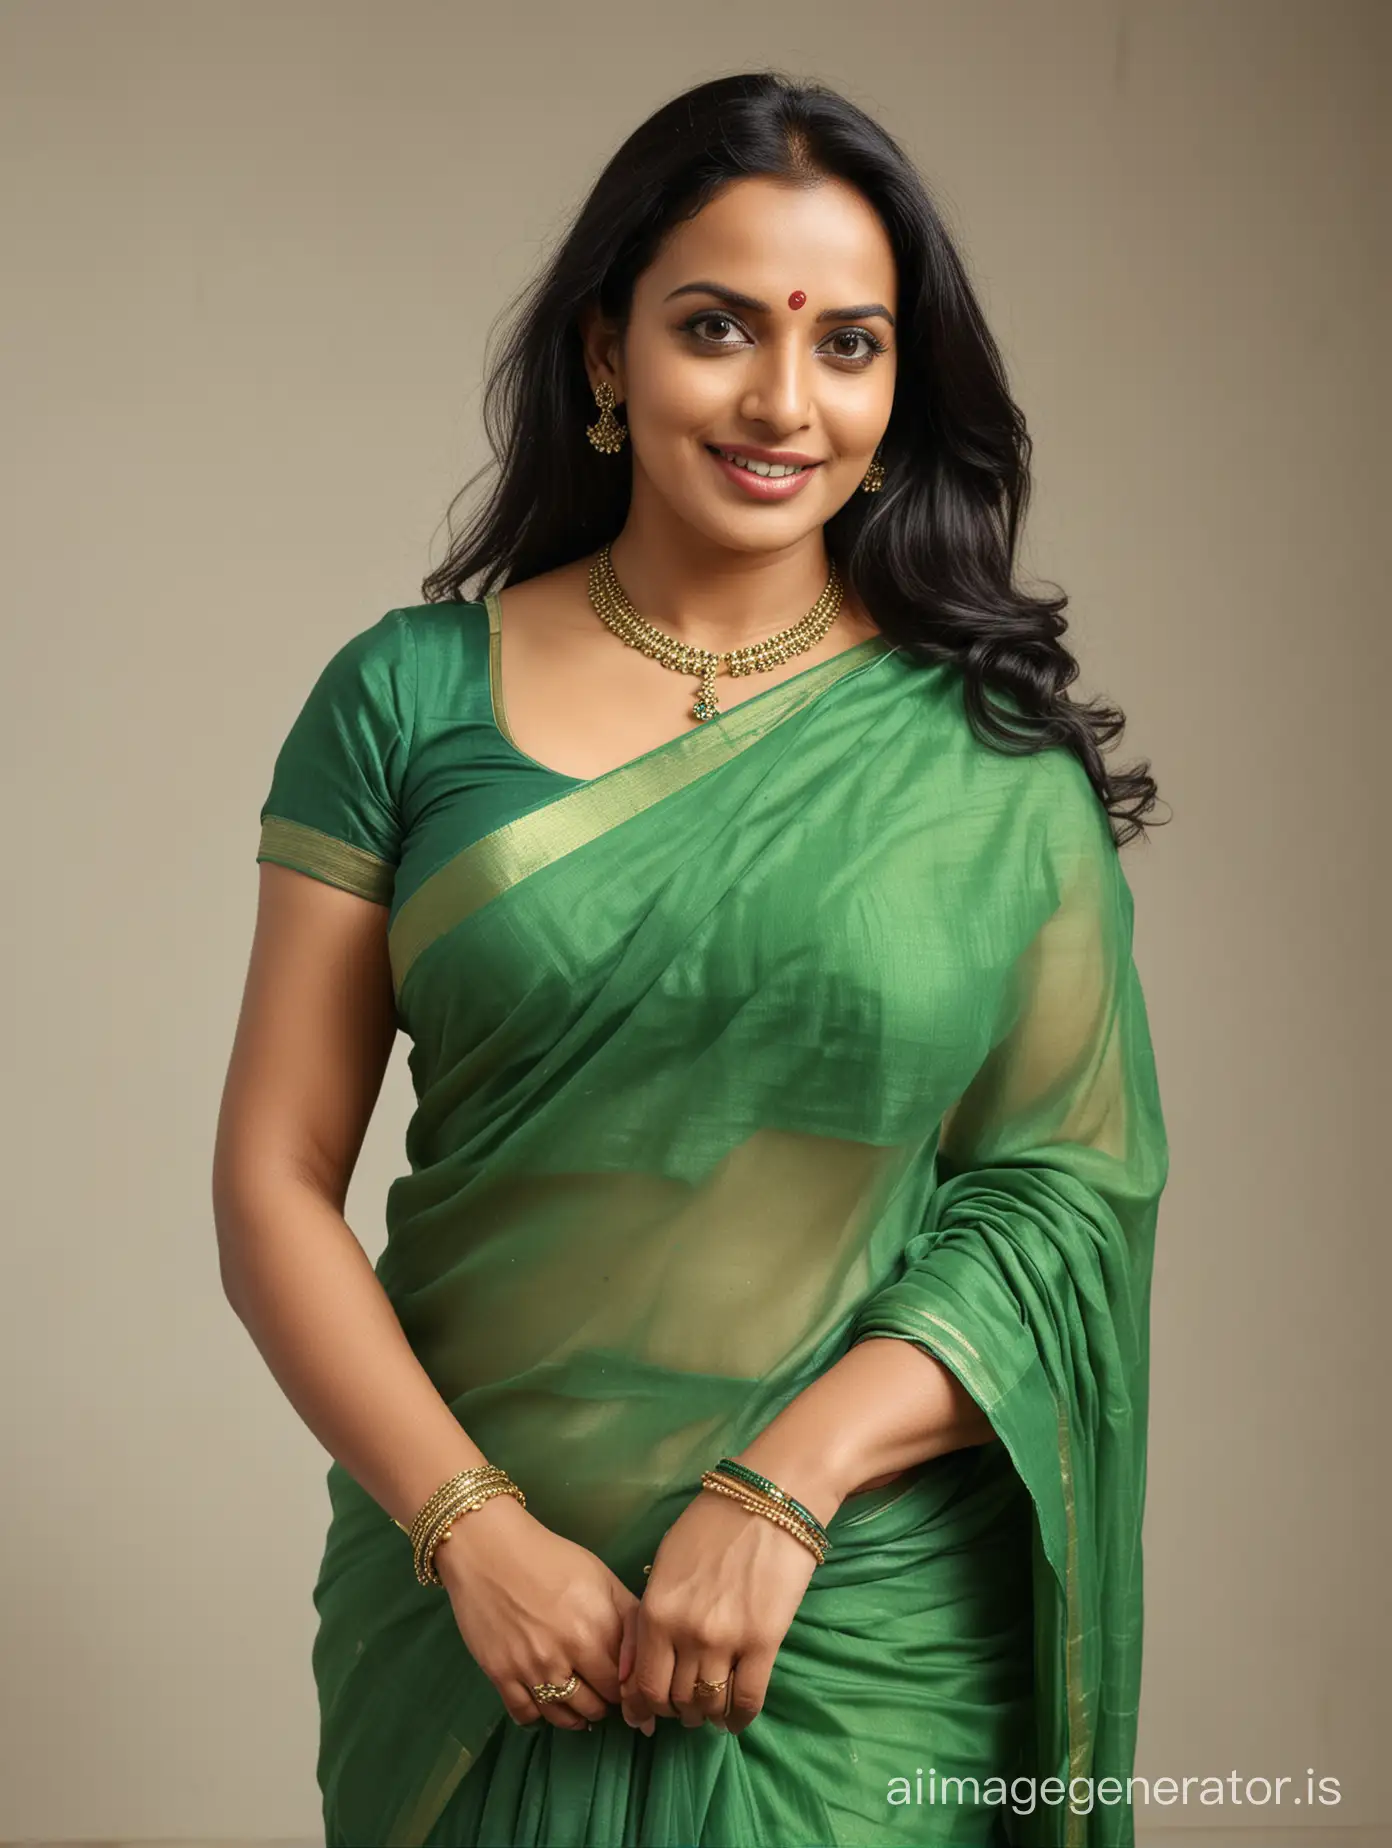 DSLR Full body image of A 50 years old Kerala woman who looks like Malayalam movie actress Swetha Menon. The woman is wearing a green saree with green blouse. The woman has very long hair. The woman is displaying a very naughty smile biting lips. The woman is wearing a thin mangalsutra.